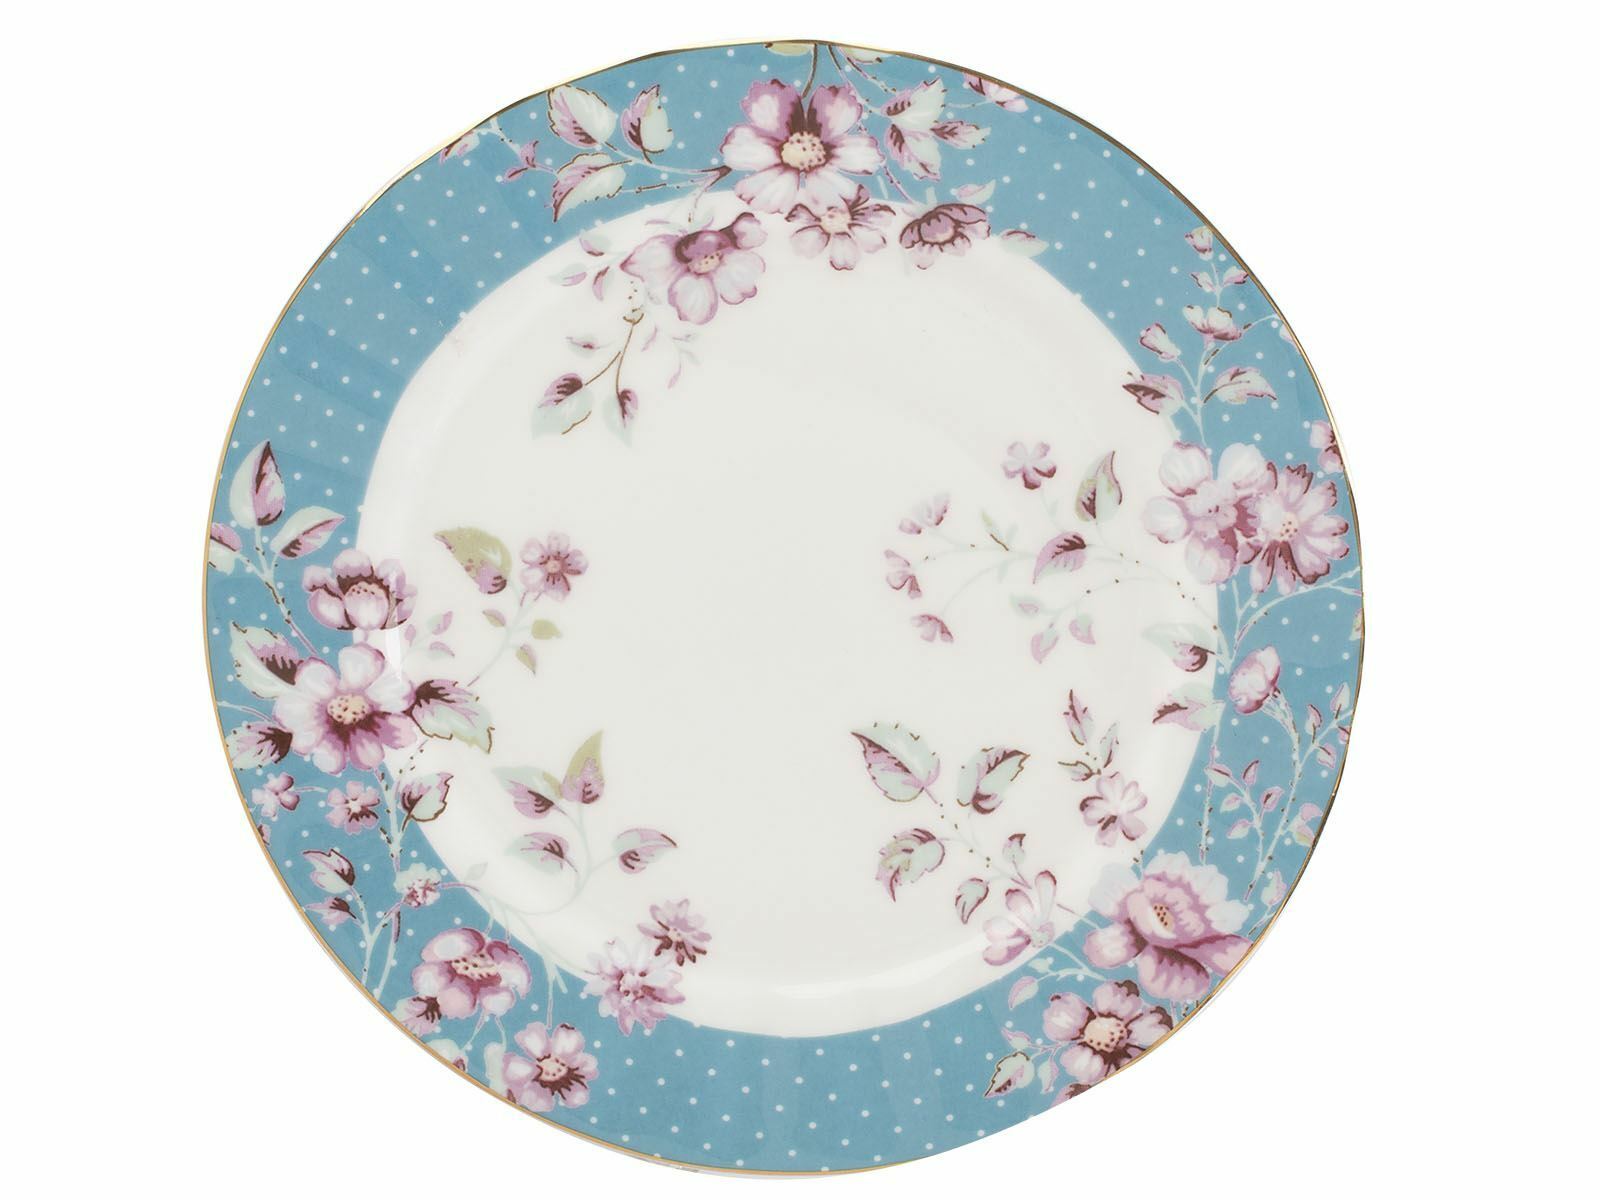 Farfurie - Katie Alice Ditsy Floral Teal Side Plate | Creative Tops